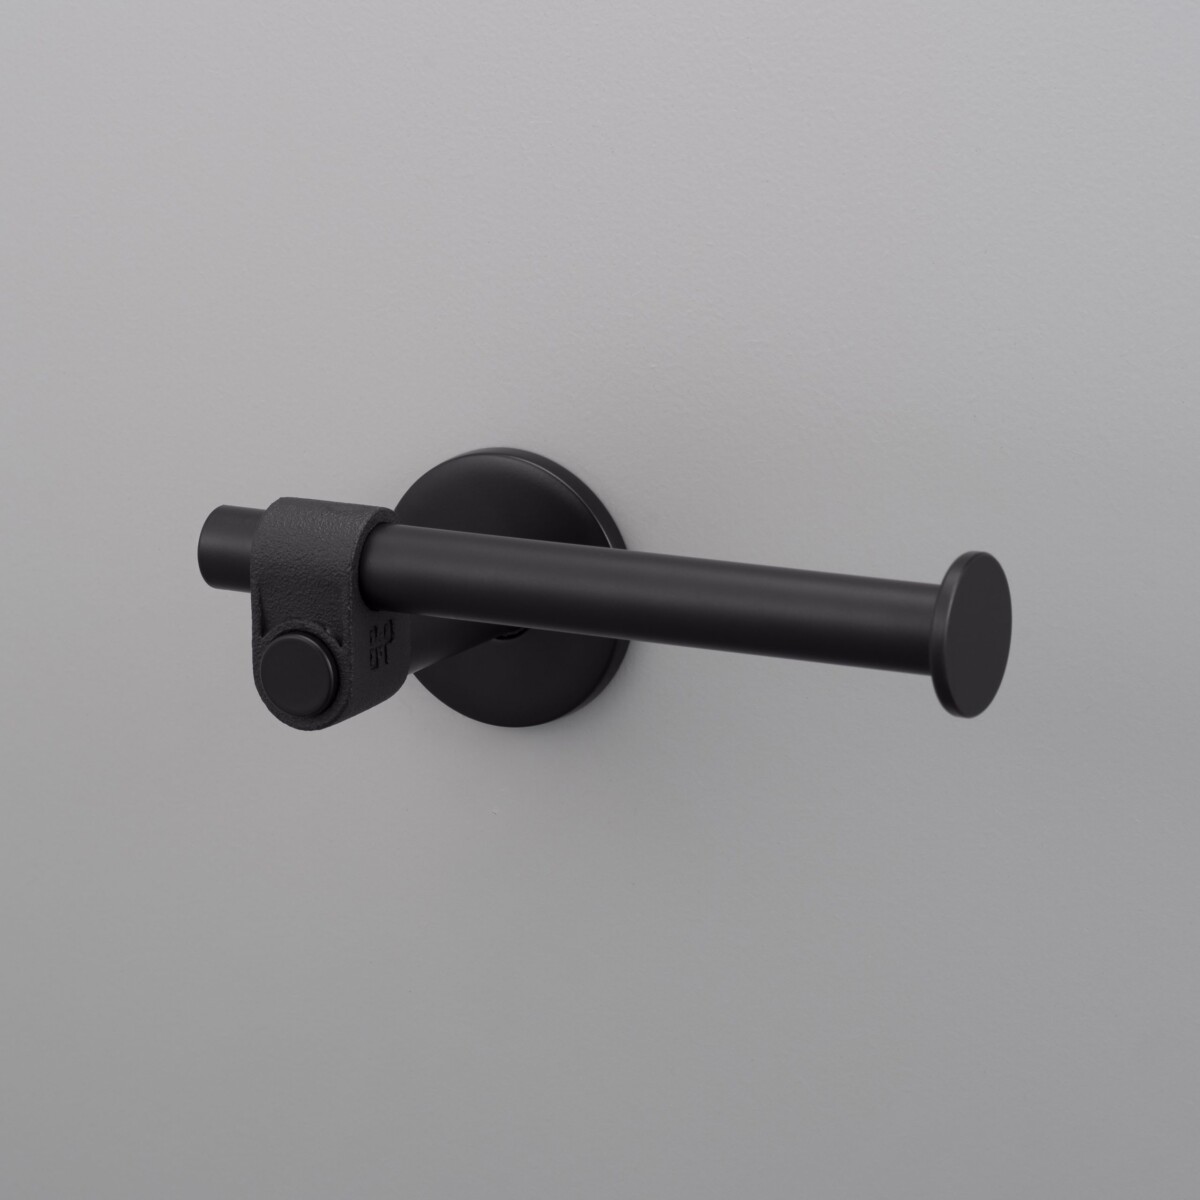 BP_Cast_Toilet_Roll_Holder_Black_A2_Web-1-scaled